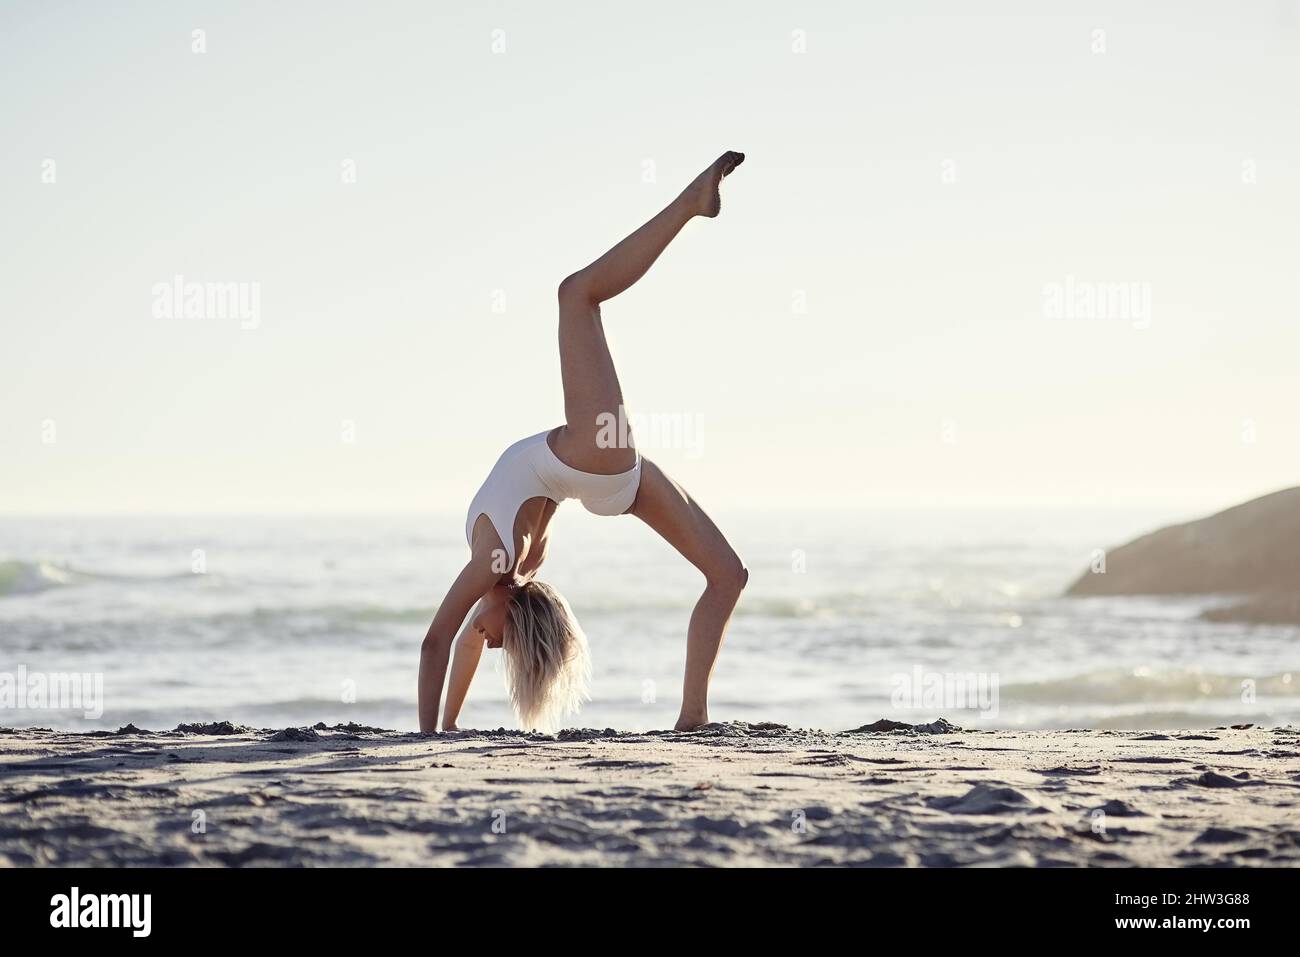 As free as the ocean. Full length shot of a young woman doing a handstand on the beach. Stock Photo